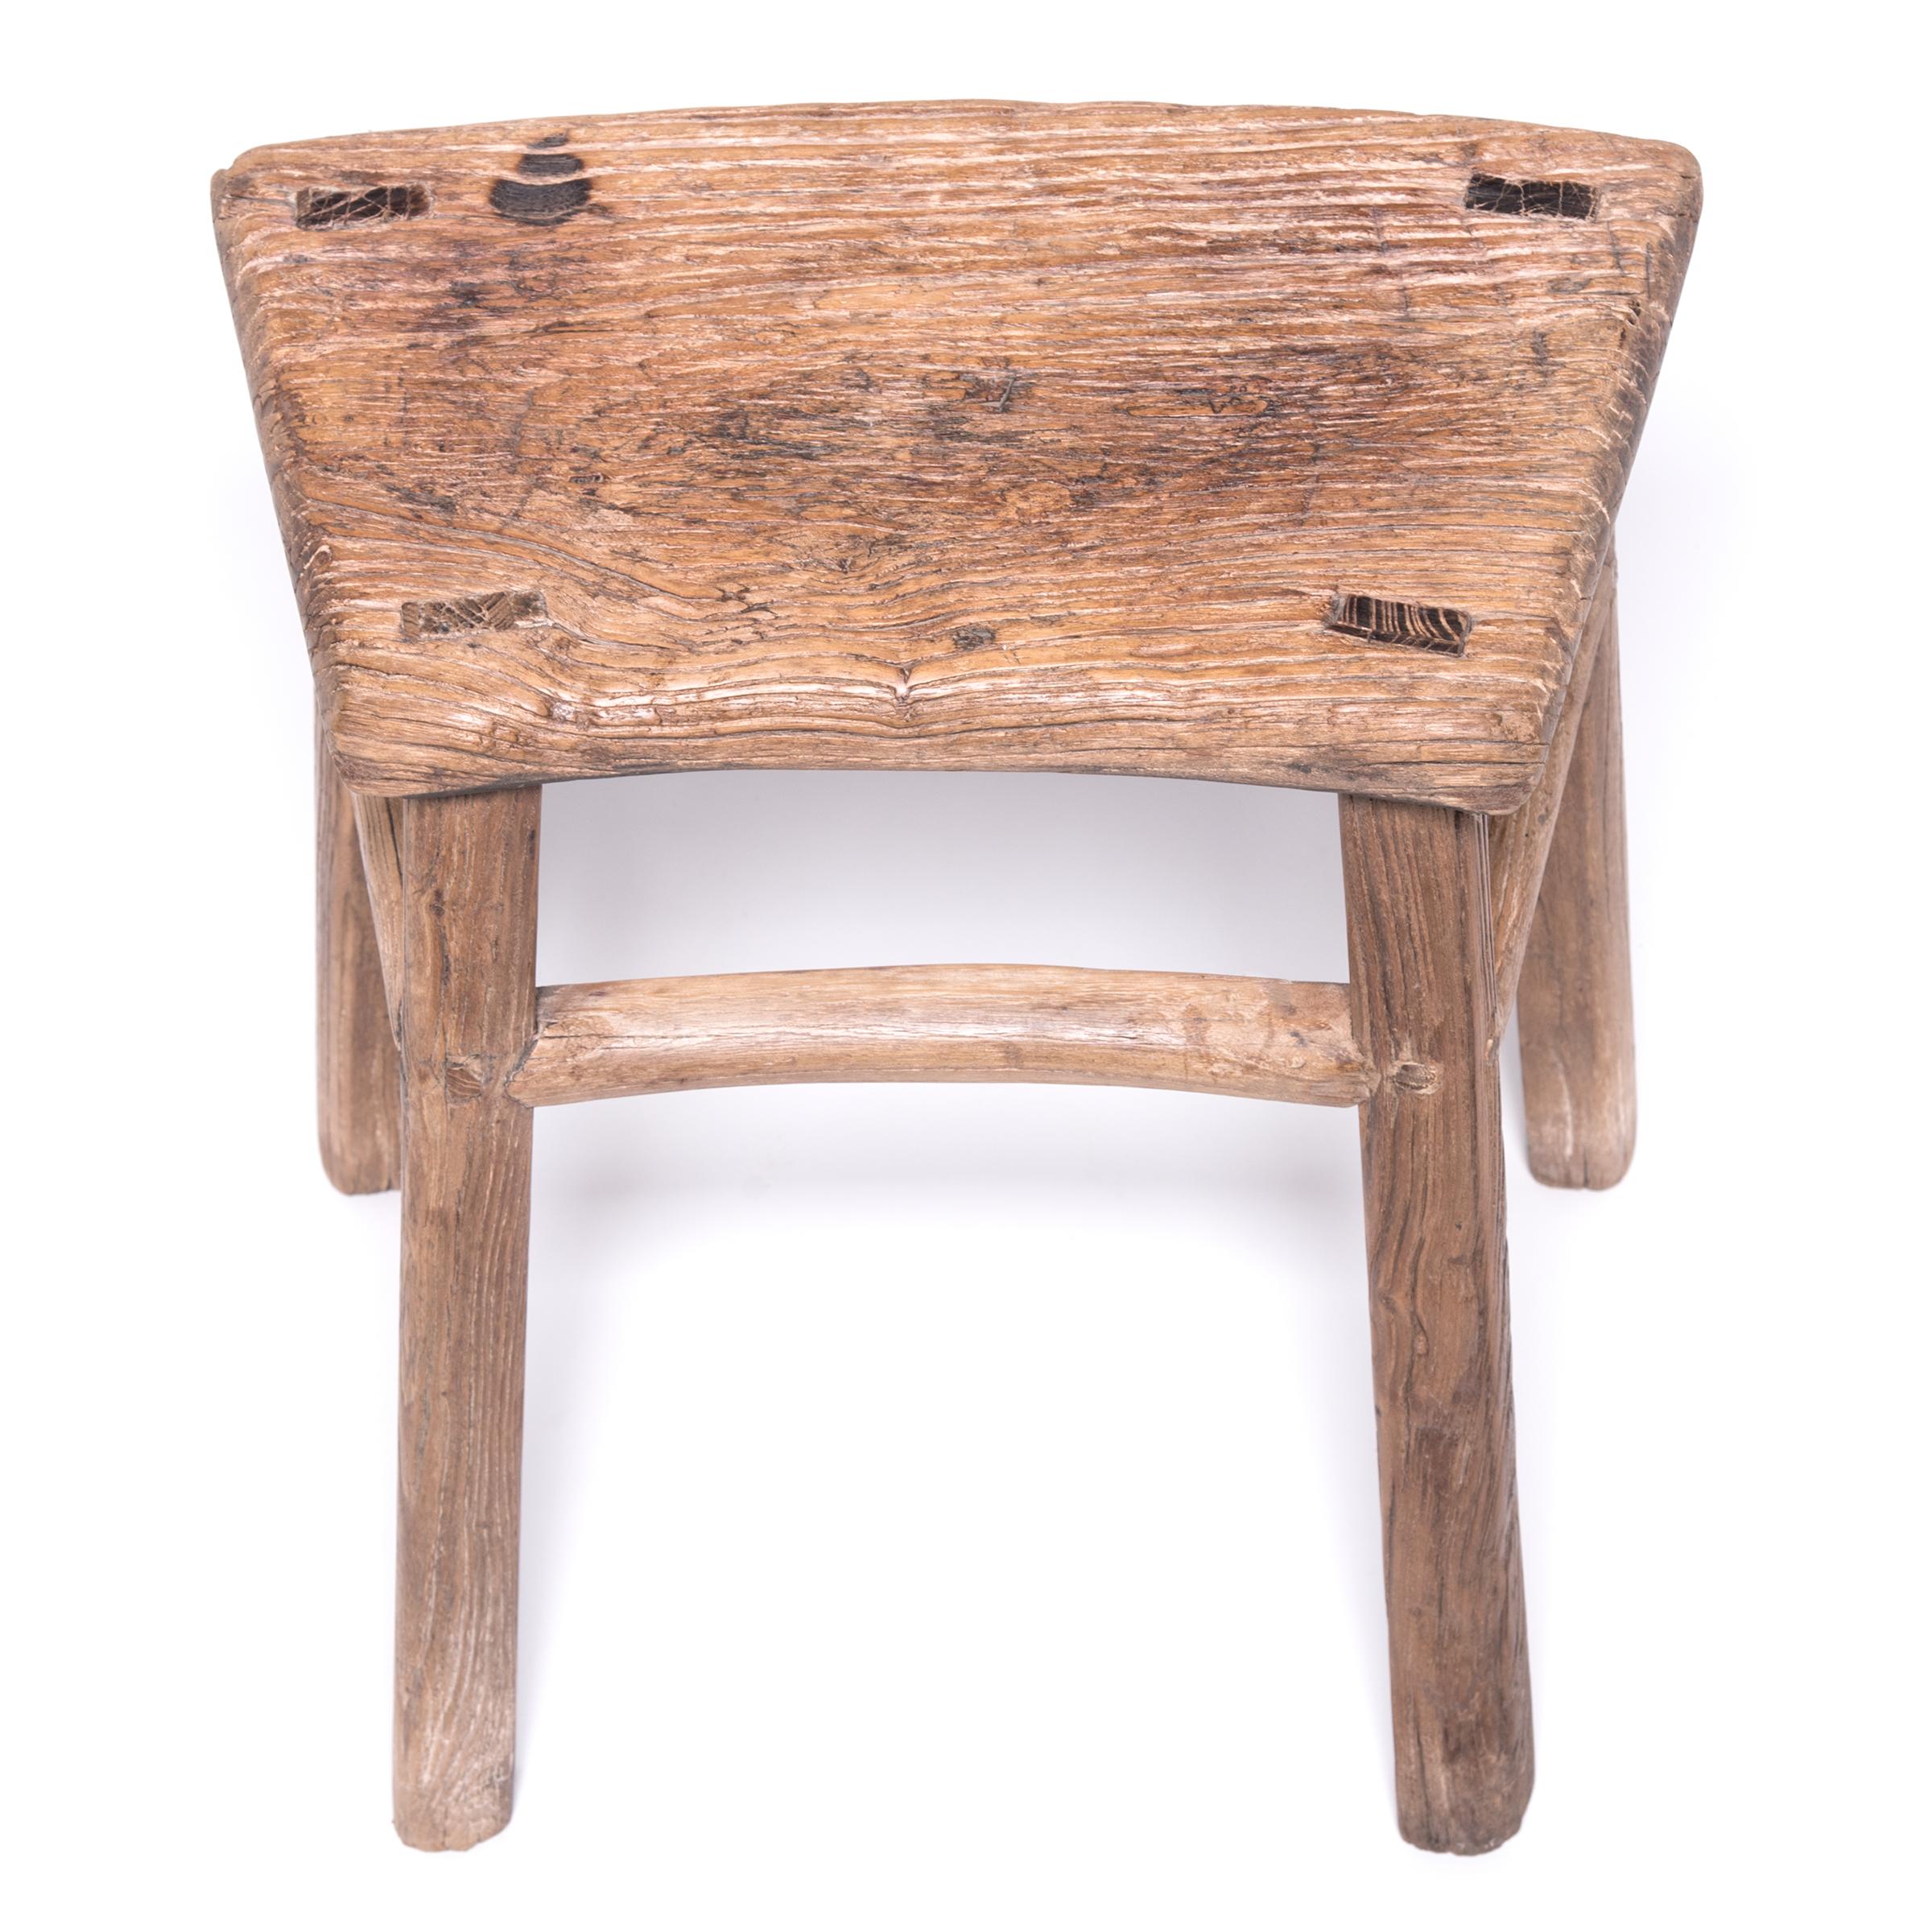 Crafted by an artisan in China's Hebei province, this mid-19th century stool has aged beautifully with time, developing a rich texture that calls to be touched. The stool's traditional mortise-and-tenon joinery adds charming detail to the simple